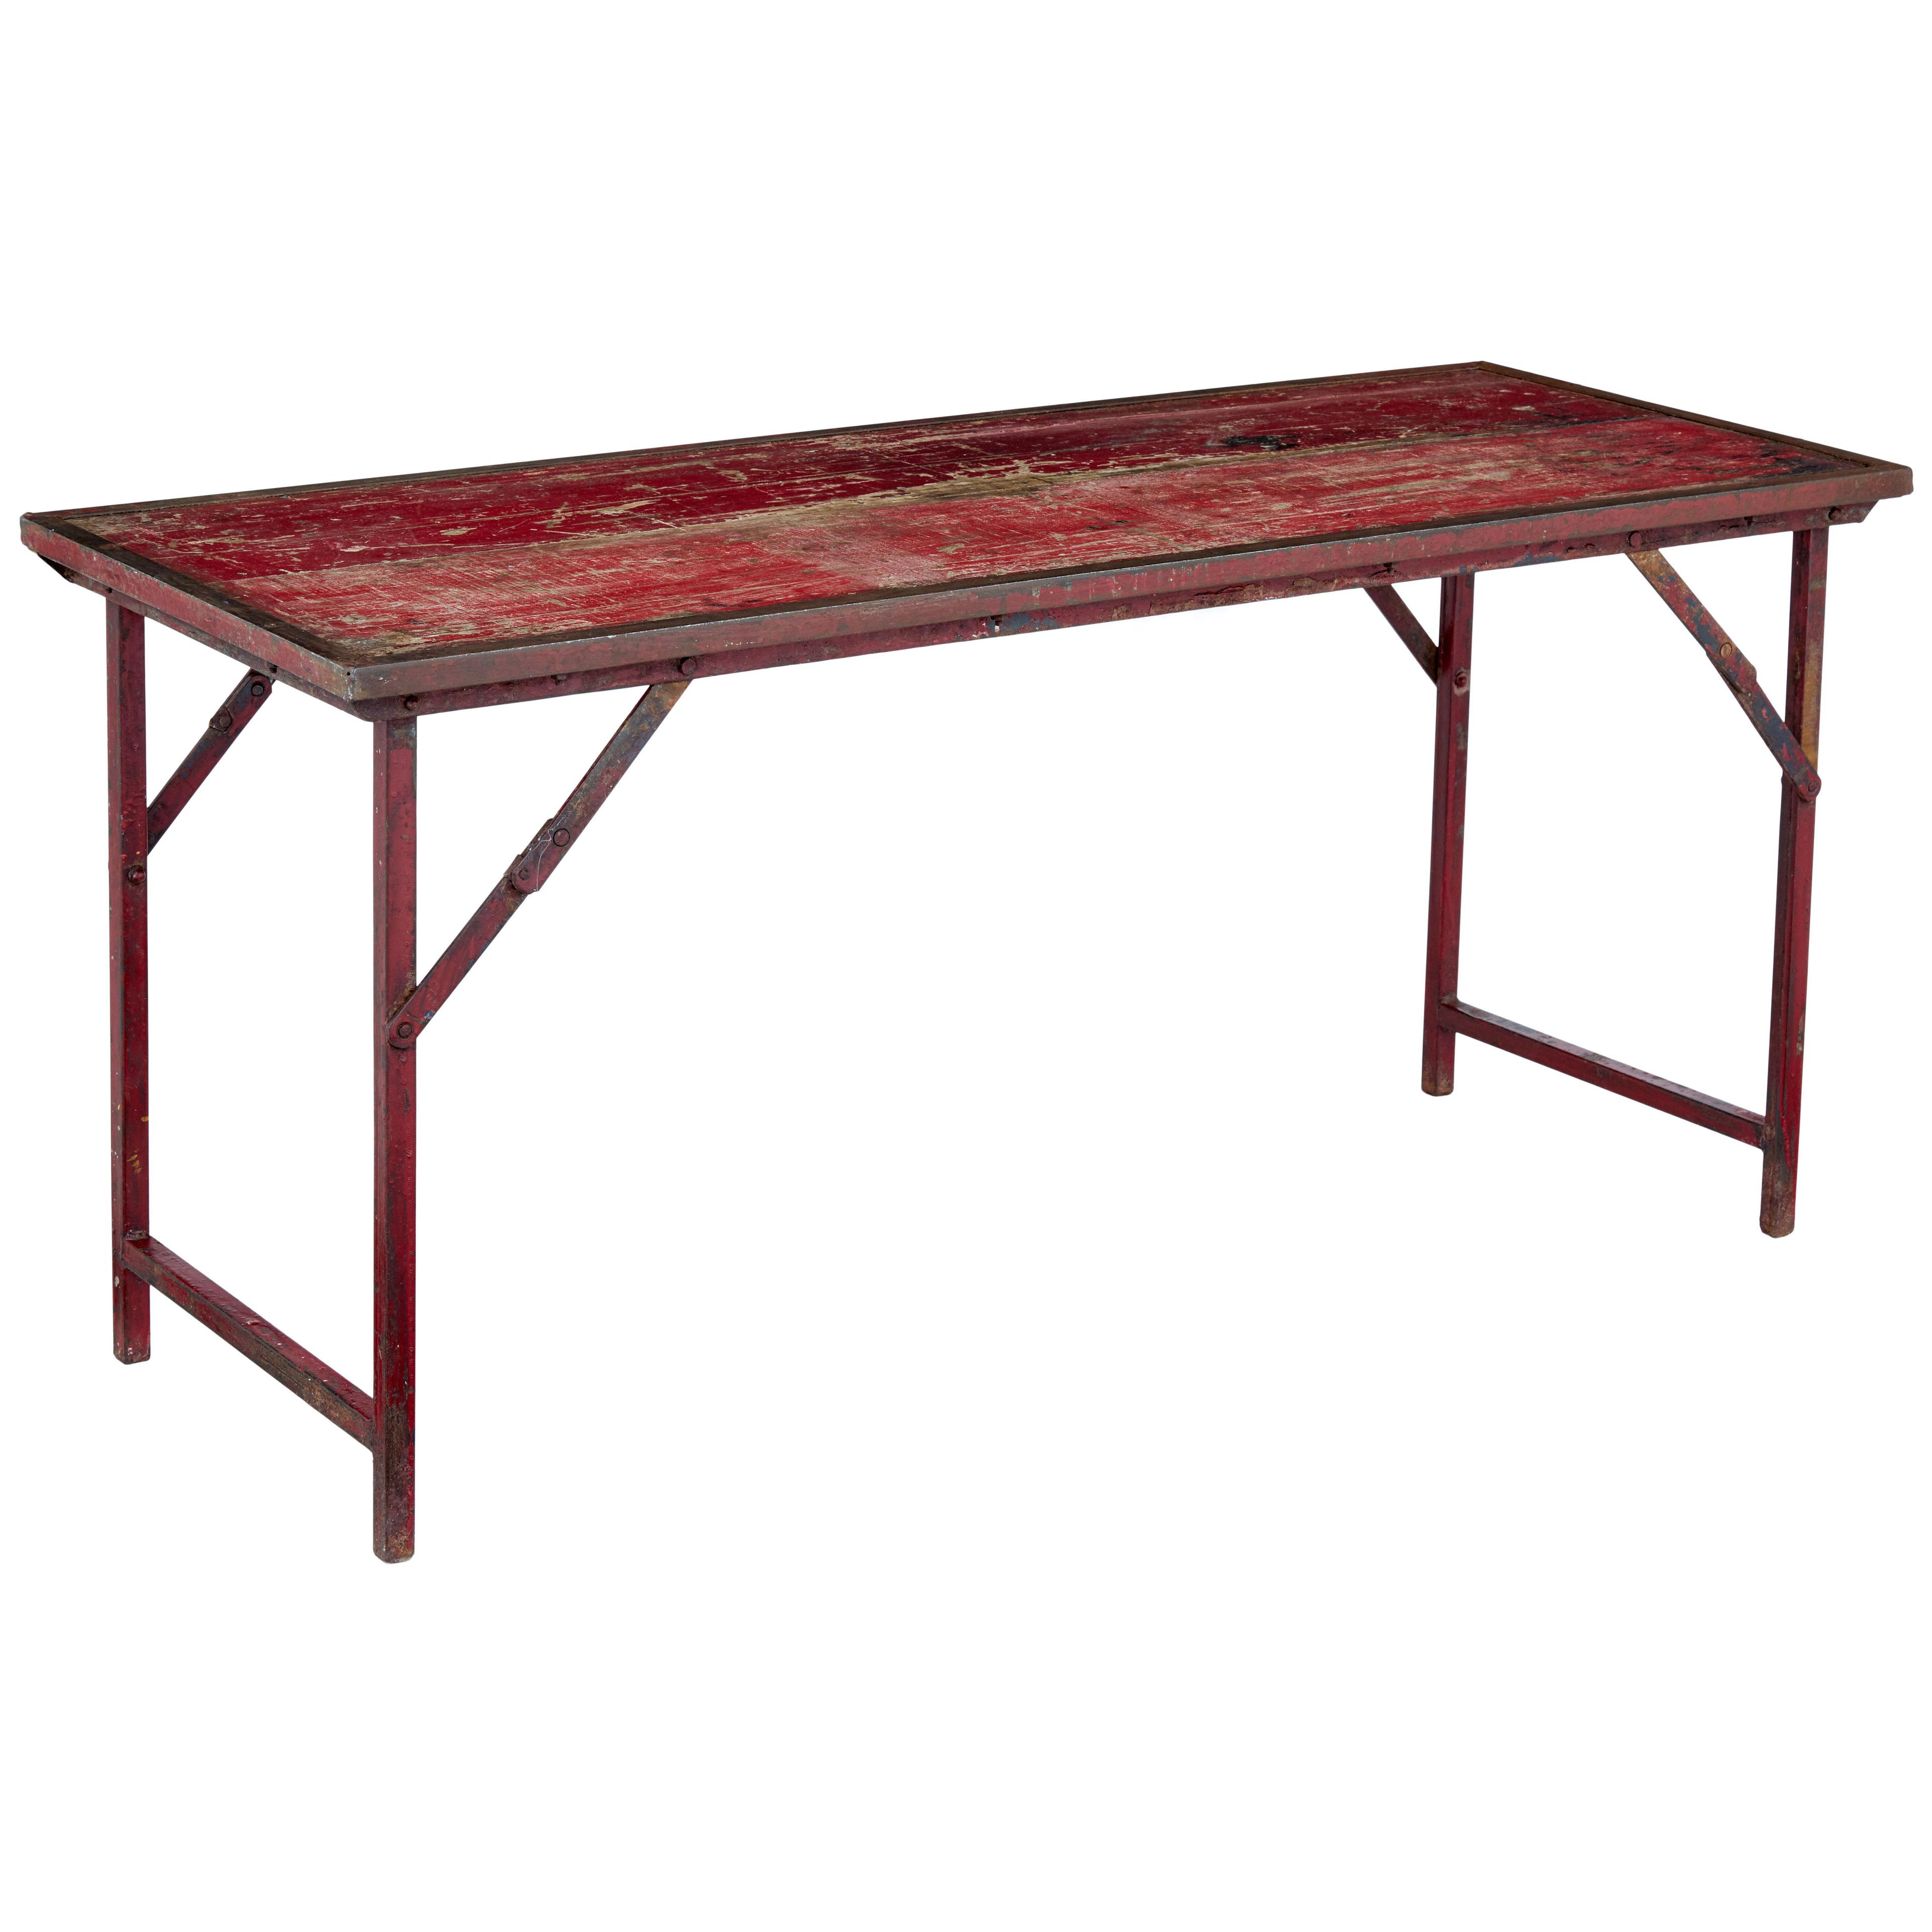 1920s’ PAINTED FRENCH PINE AND METAL FOLDING TABLE